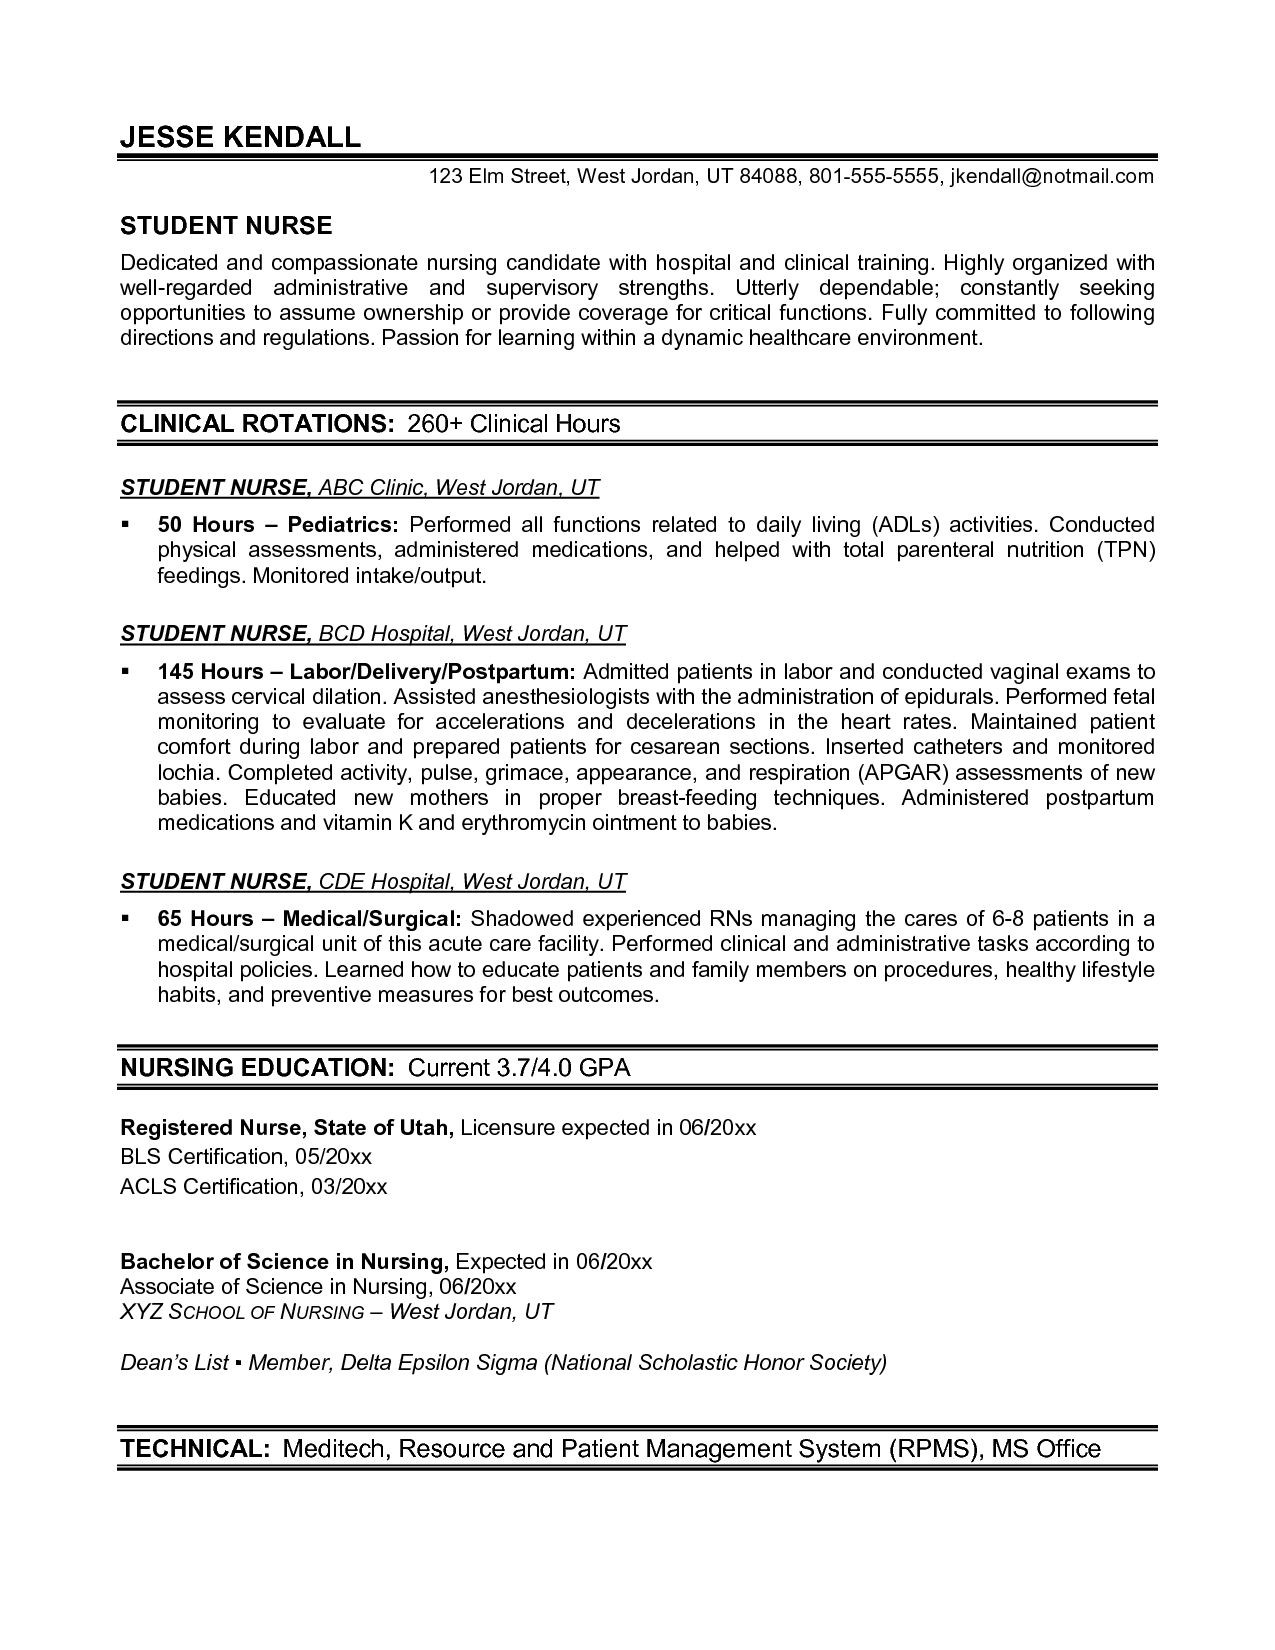 New Grad Rn Resume Objective Sample New Grad Resume Labor and Delivery Rn – Yahoo Image Search Results …